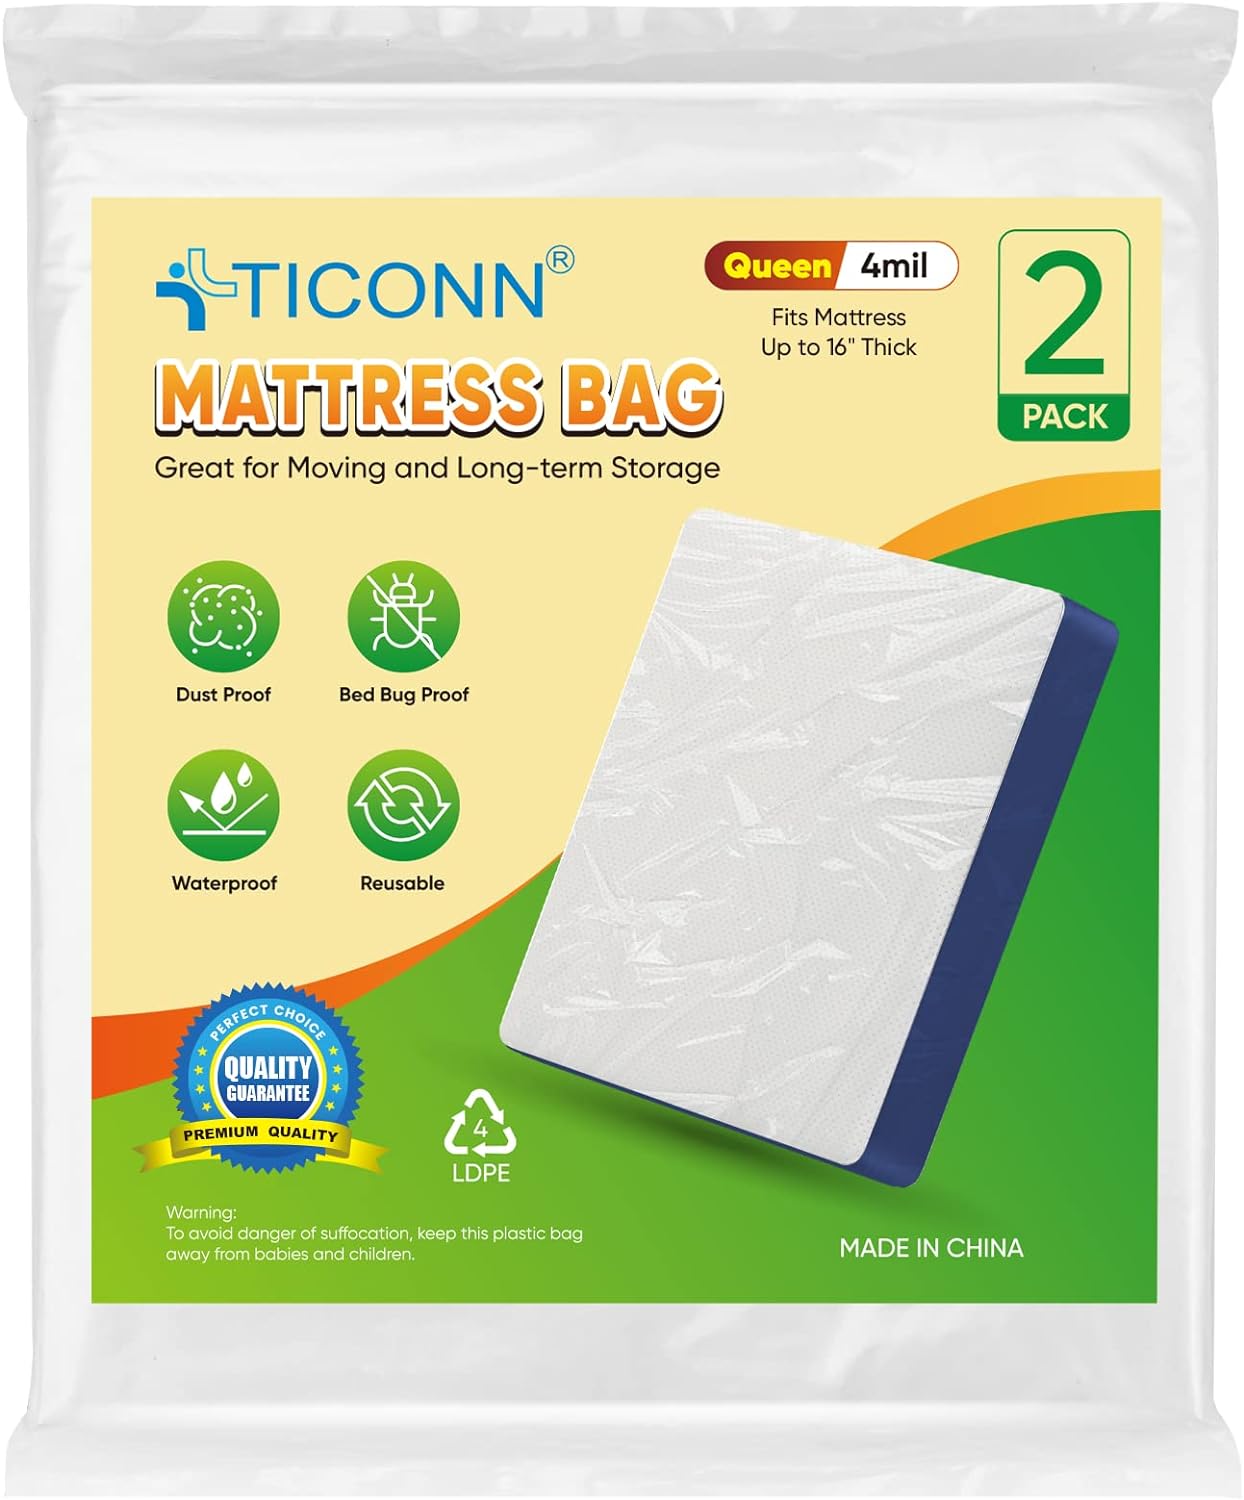 This came in very handy and covered my queen size plush top mattress with room to spare. It doesn't come with a ziploc, but still protected my mattress very well, and it' reusable. You may have to staple it shut.